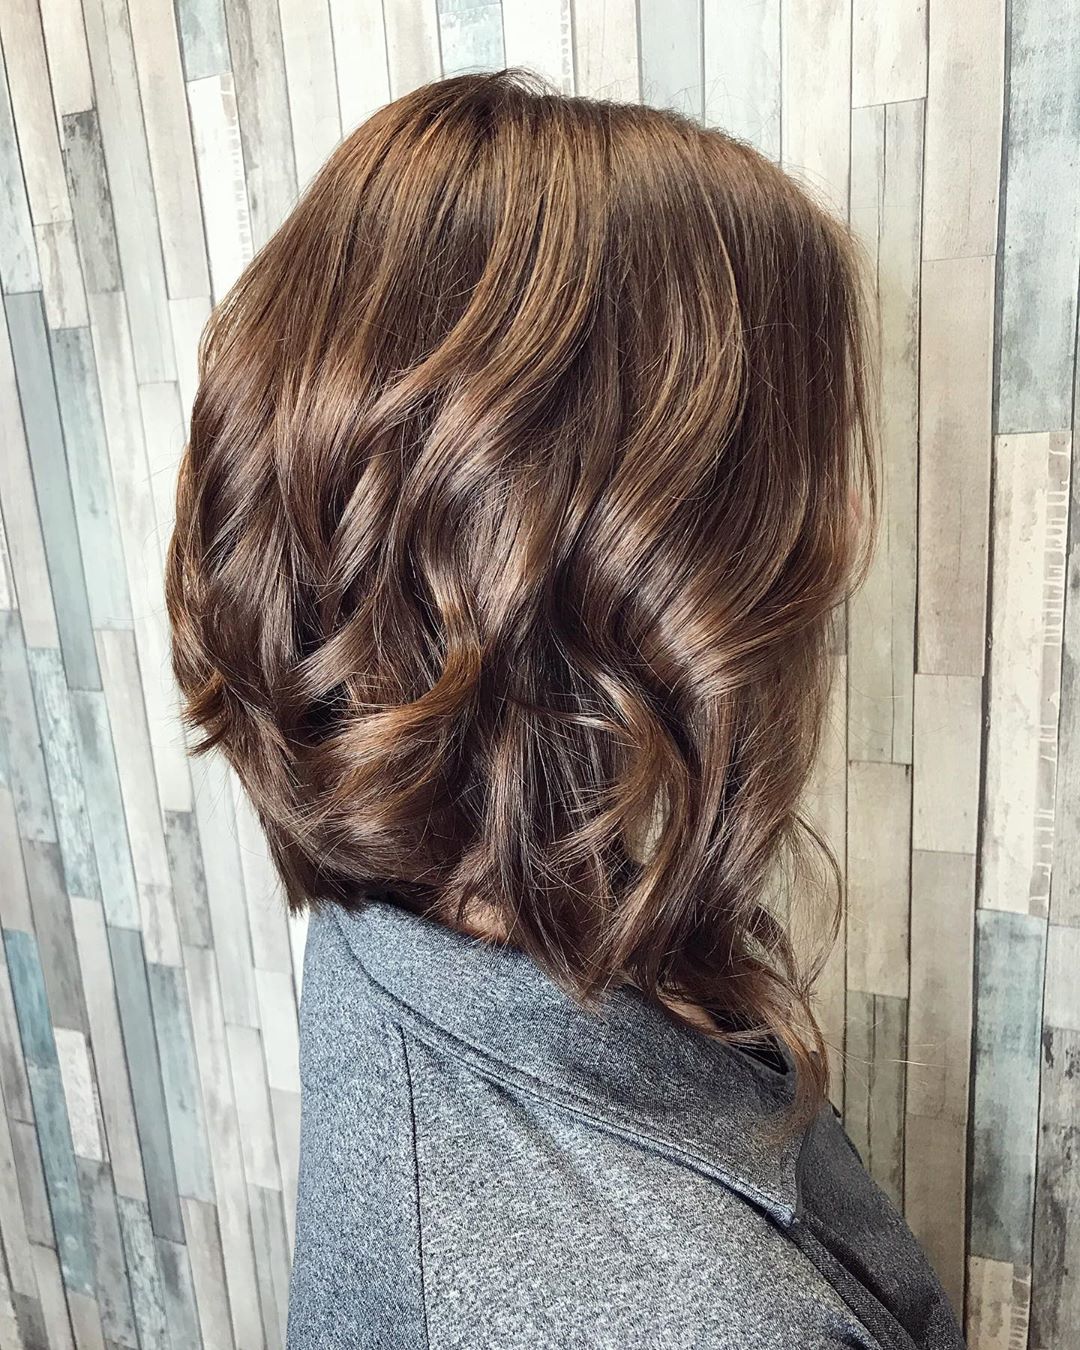 Shoulder length Inverted Bob for Thick Hair with Curls